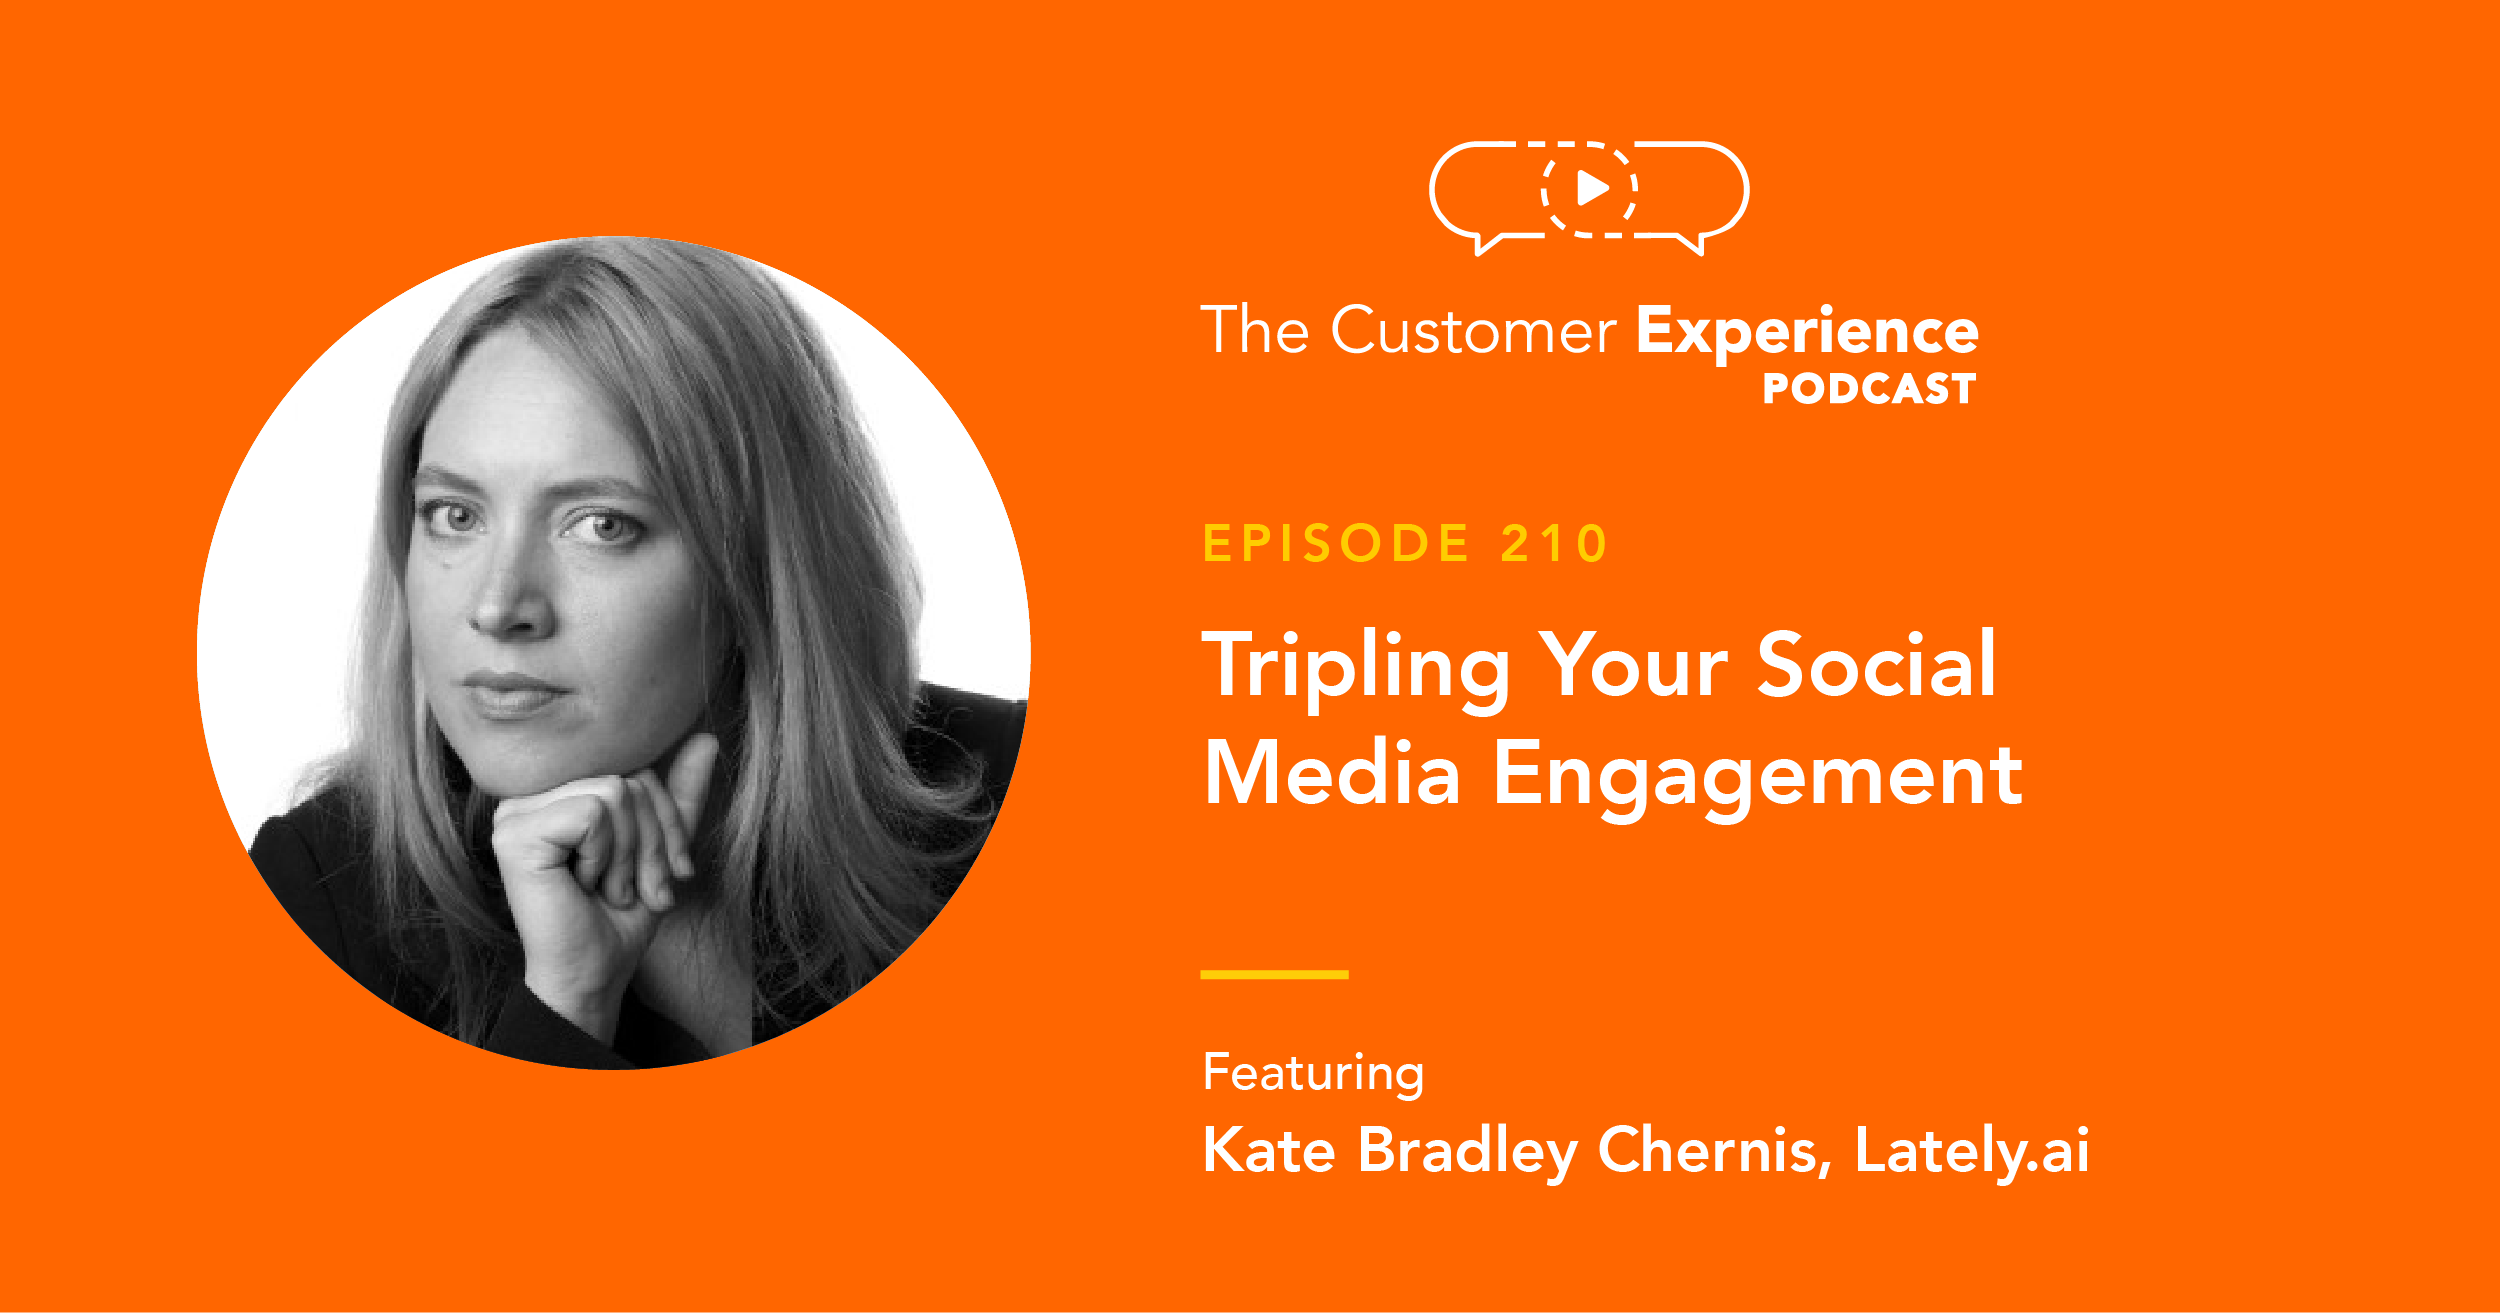 Kate Bradley Chernis, Lately, Latelly.ai, Social Media, The Customer Experience Podcast, Co-Founder, CEO, social media engagement, customer engagement, social likes, social comments, social clicks, social shares